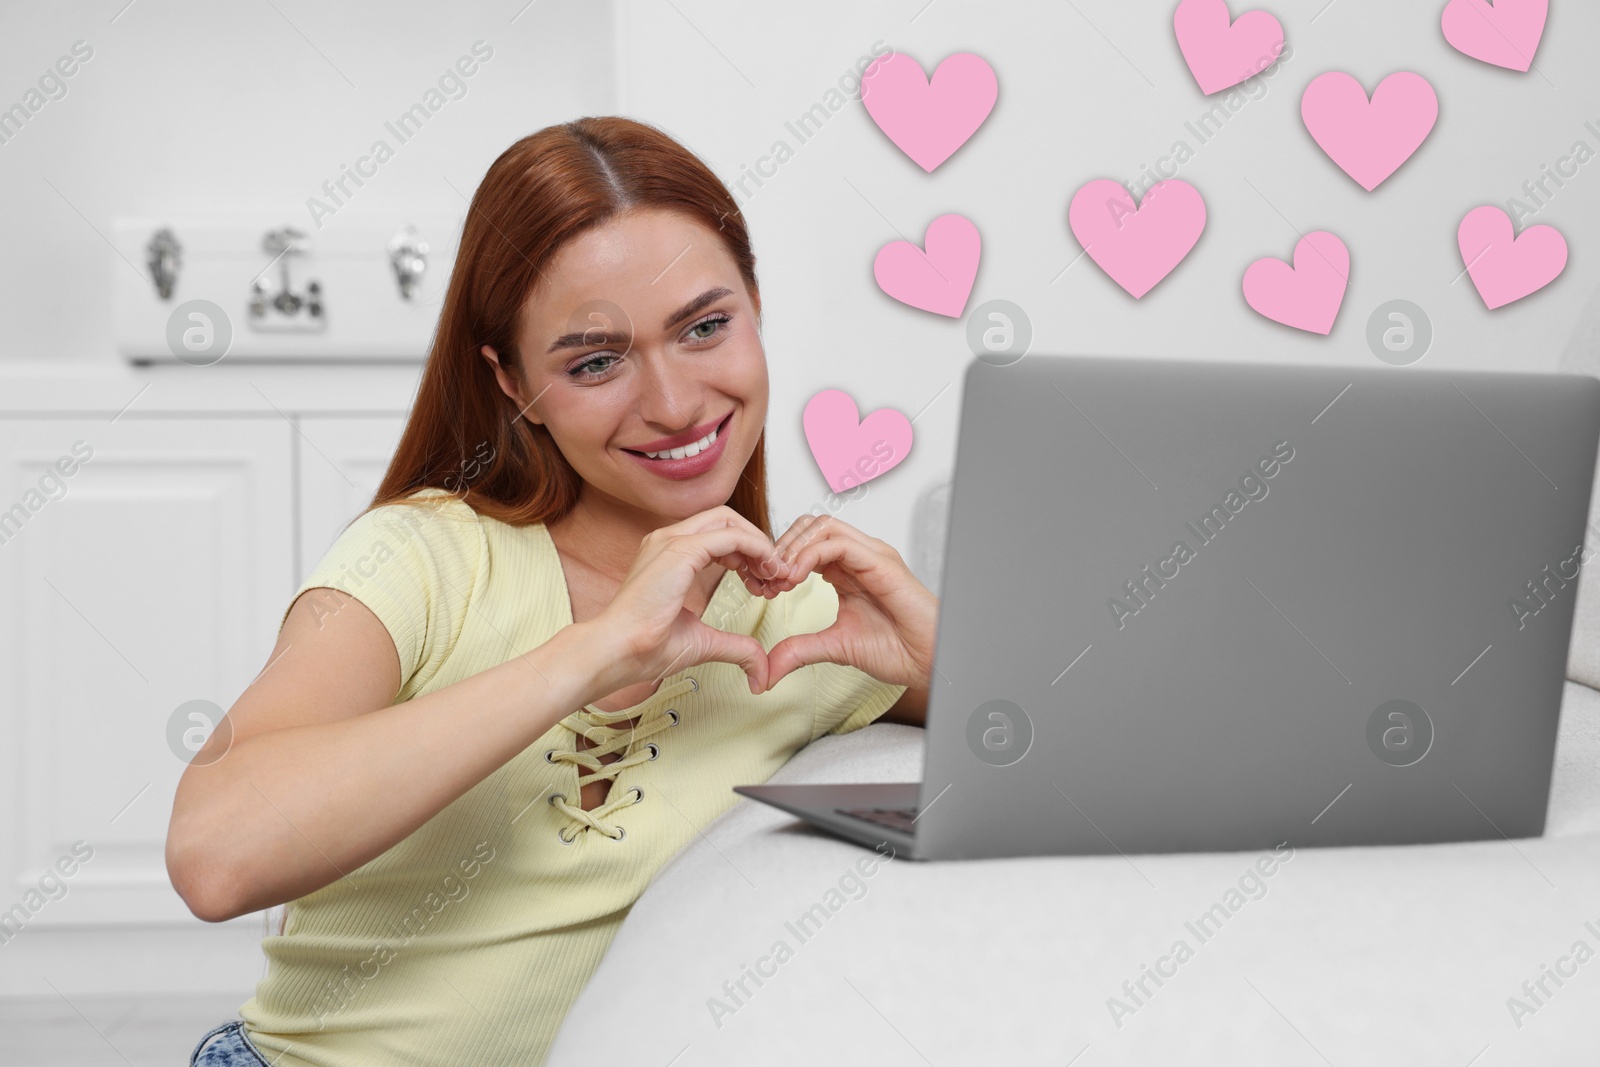 Image of Long distance relationship. Young woman having video chat with her loved one indoors. Pink hearts near her